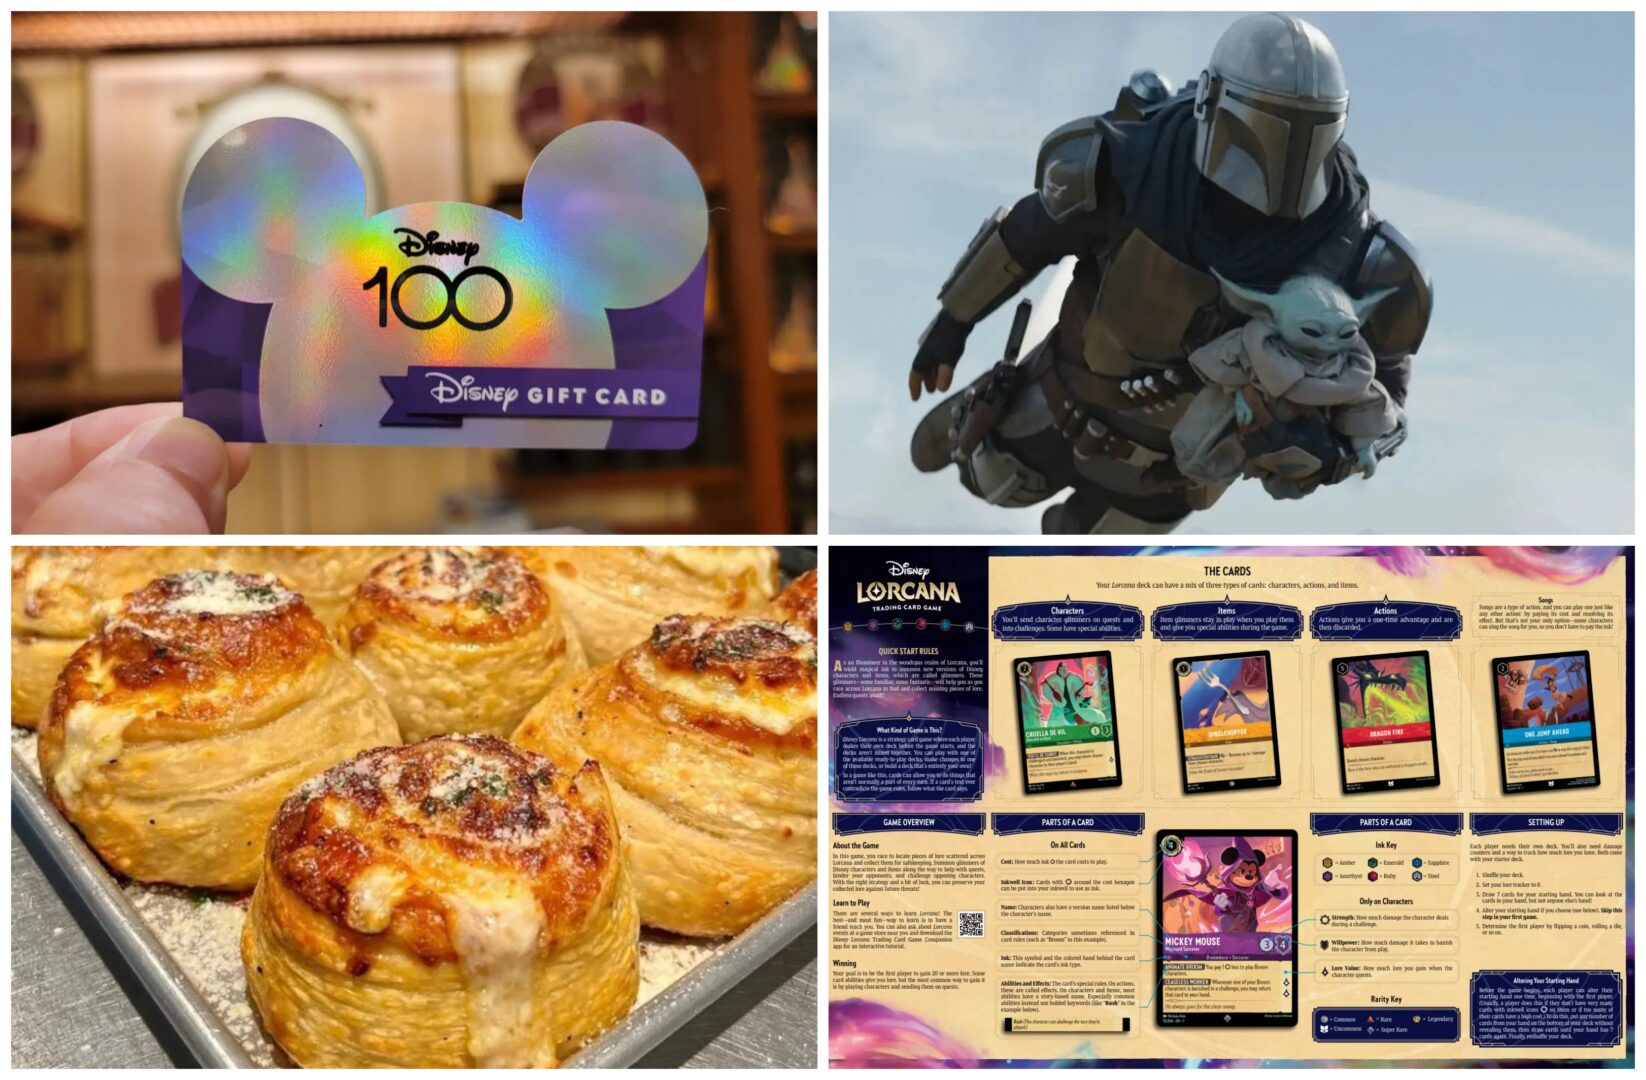 Disney News Highlights: Breakfast at The Lunching Pad, New Lorcana Gameplay Released, Poseidon’s Fury Closed Permanently, Padro Pascal Not Happy Direction of the Mandolorian